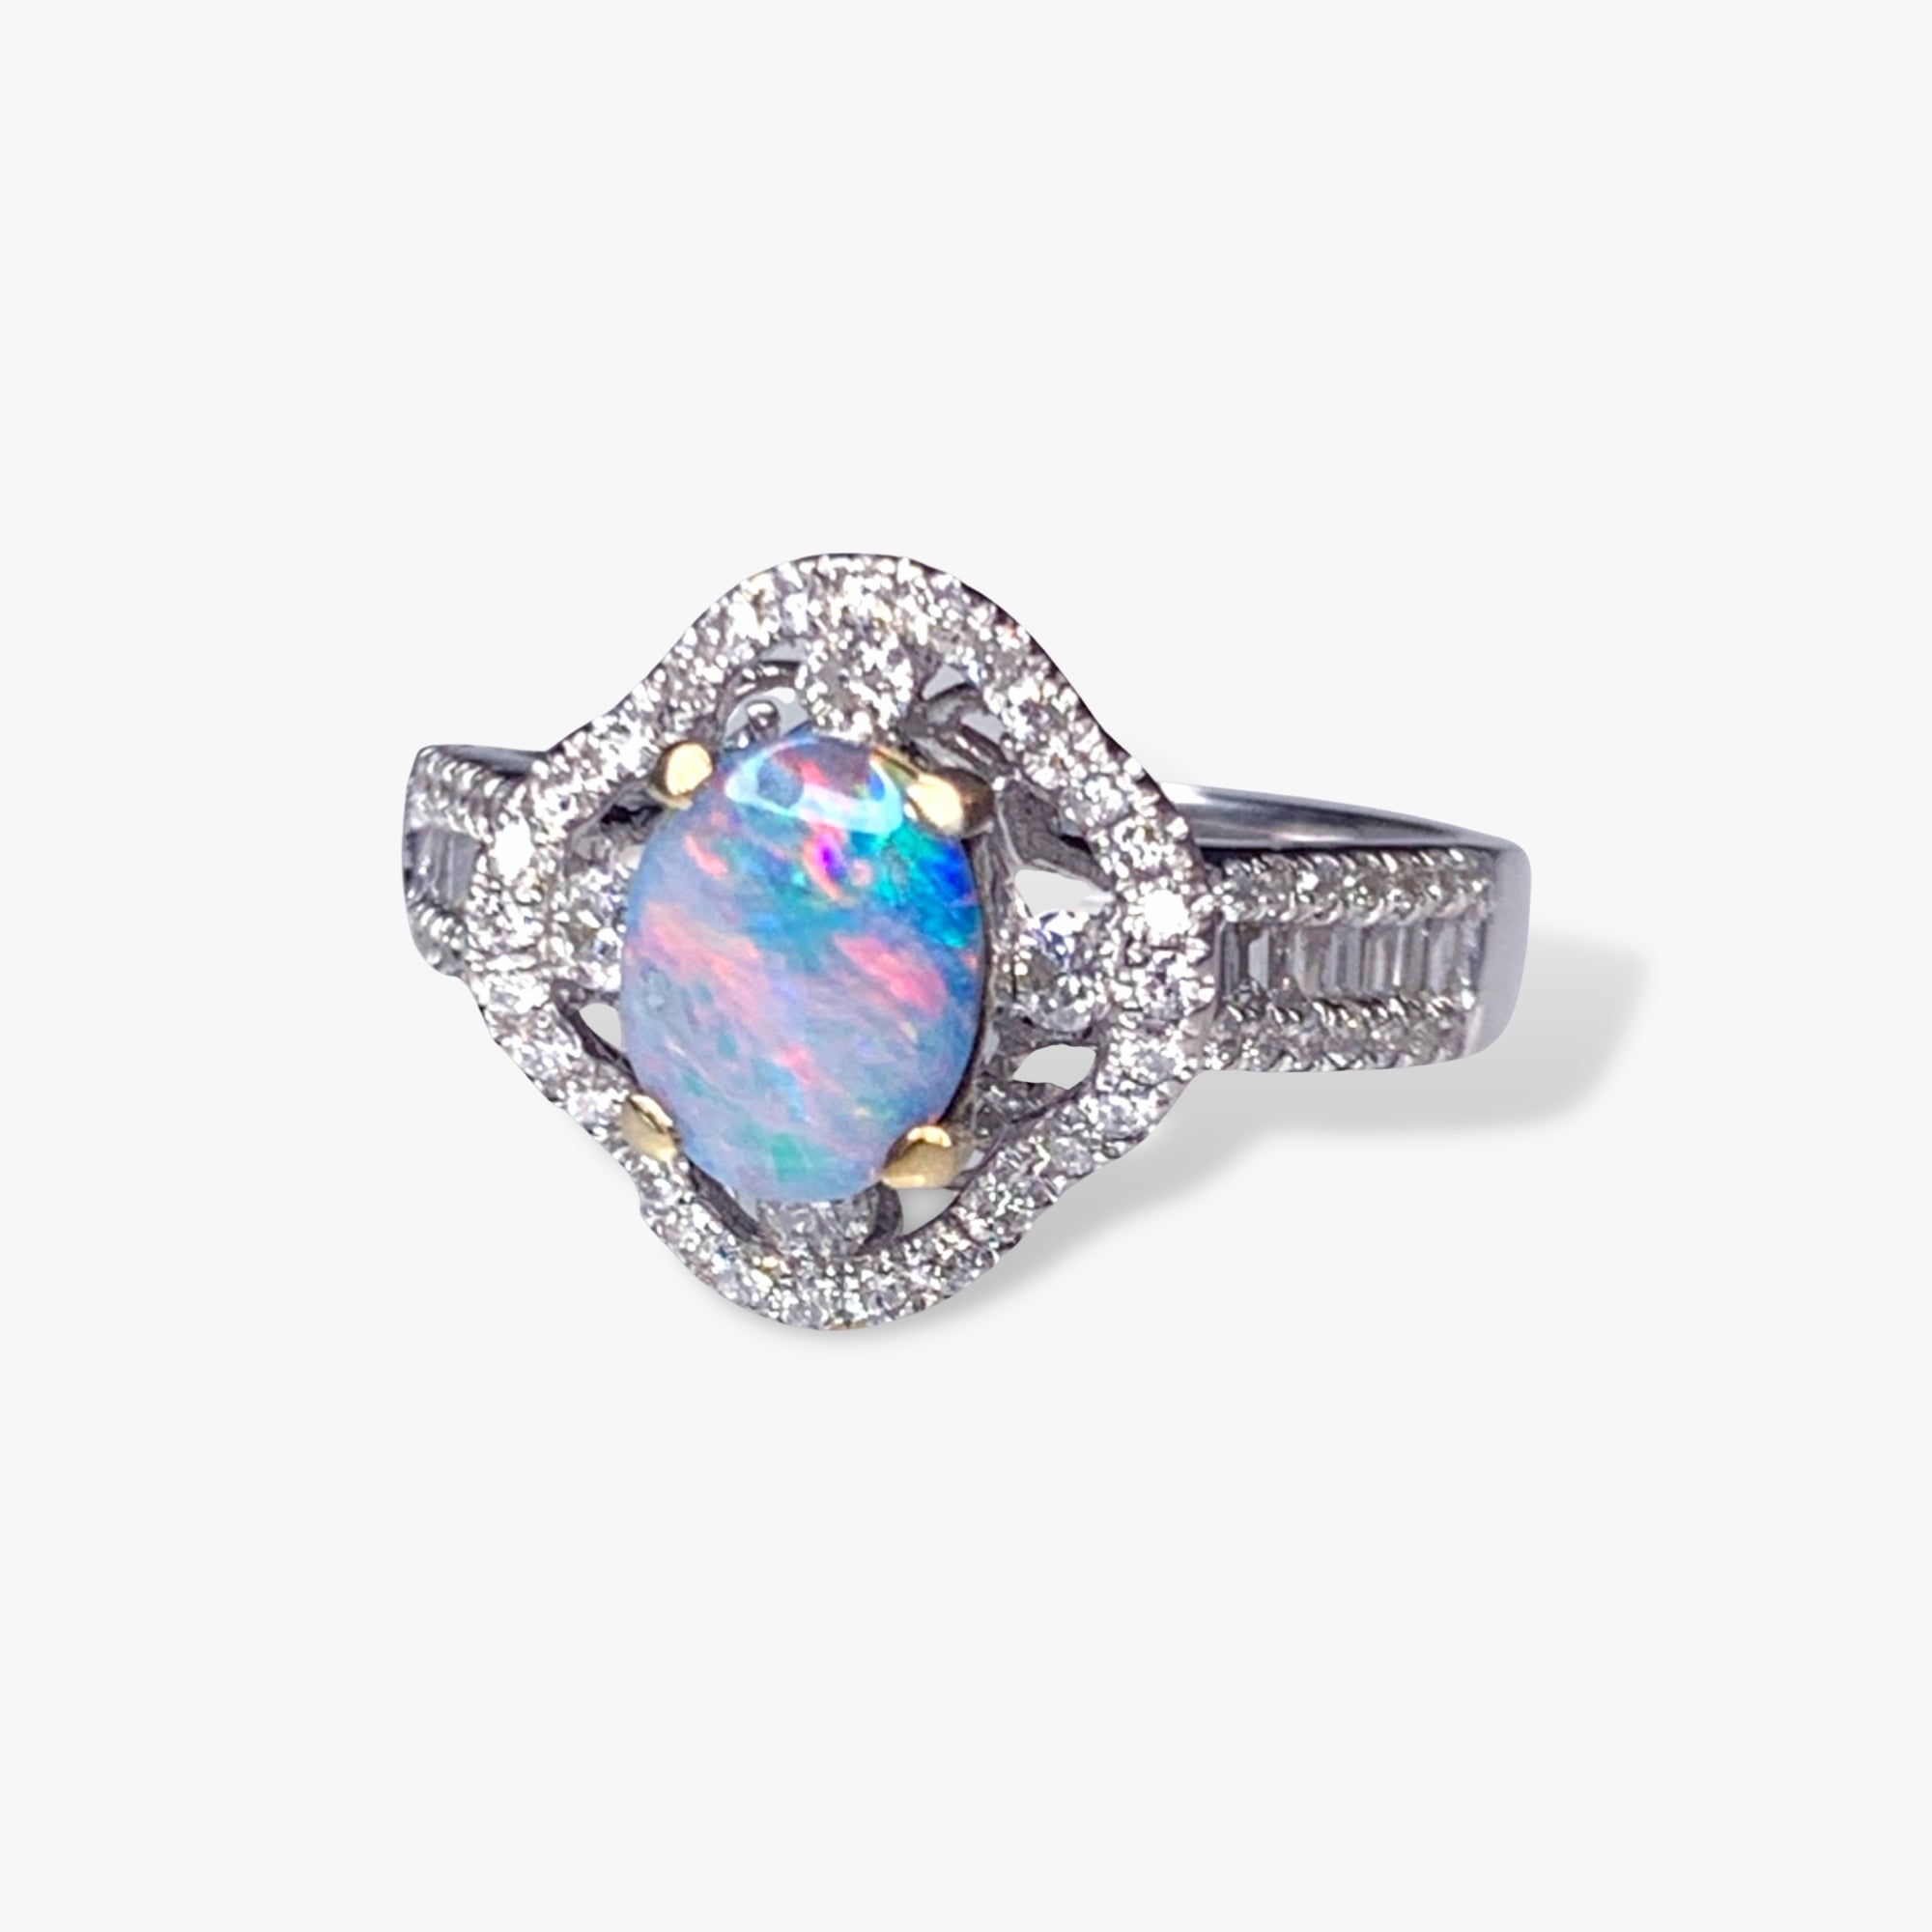 14k White Gold Cabochon White Opal and Diamond Clover Ring